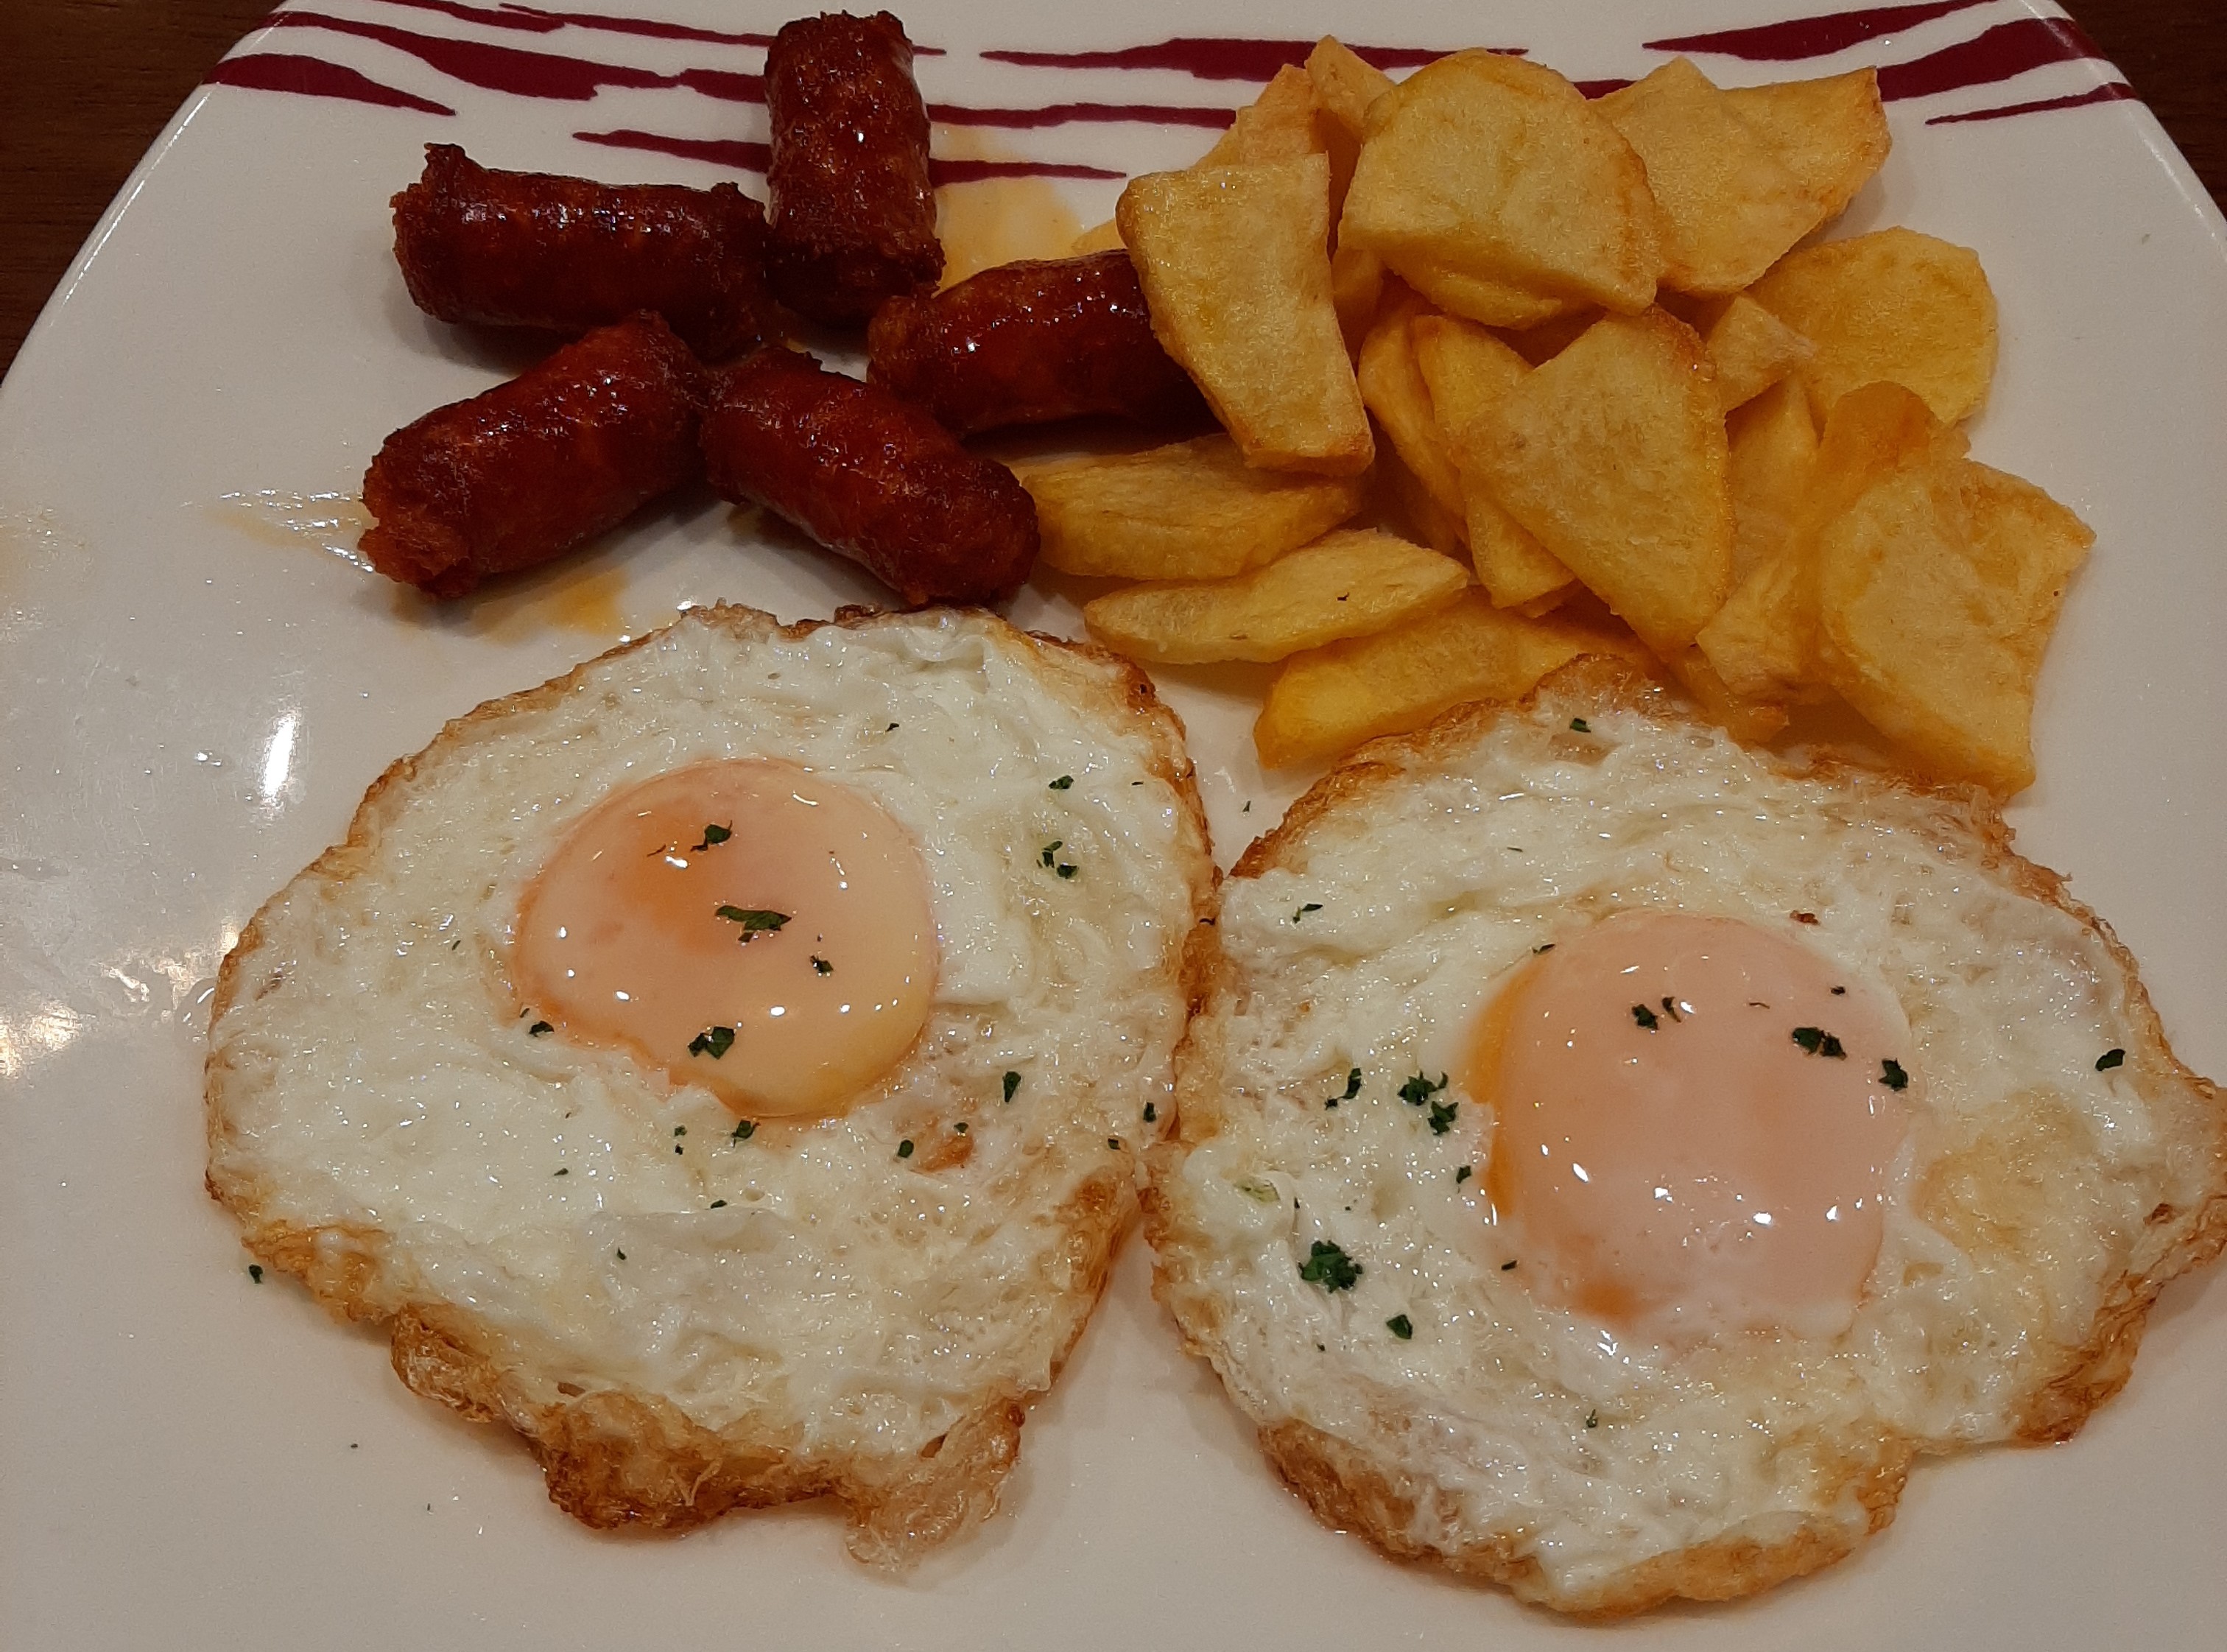 Fried eggs with txistorra (fast-cure sausage)